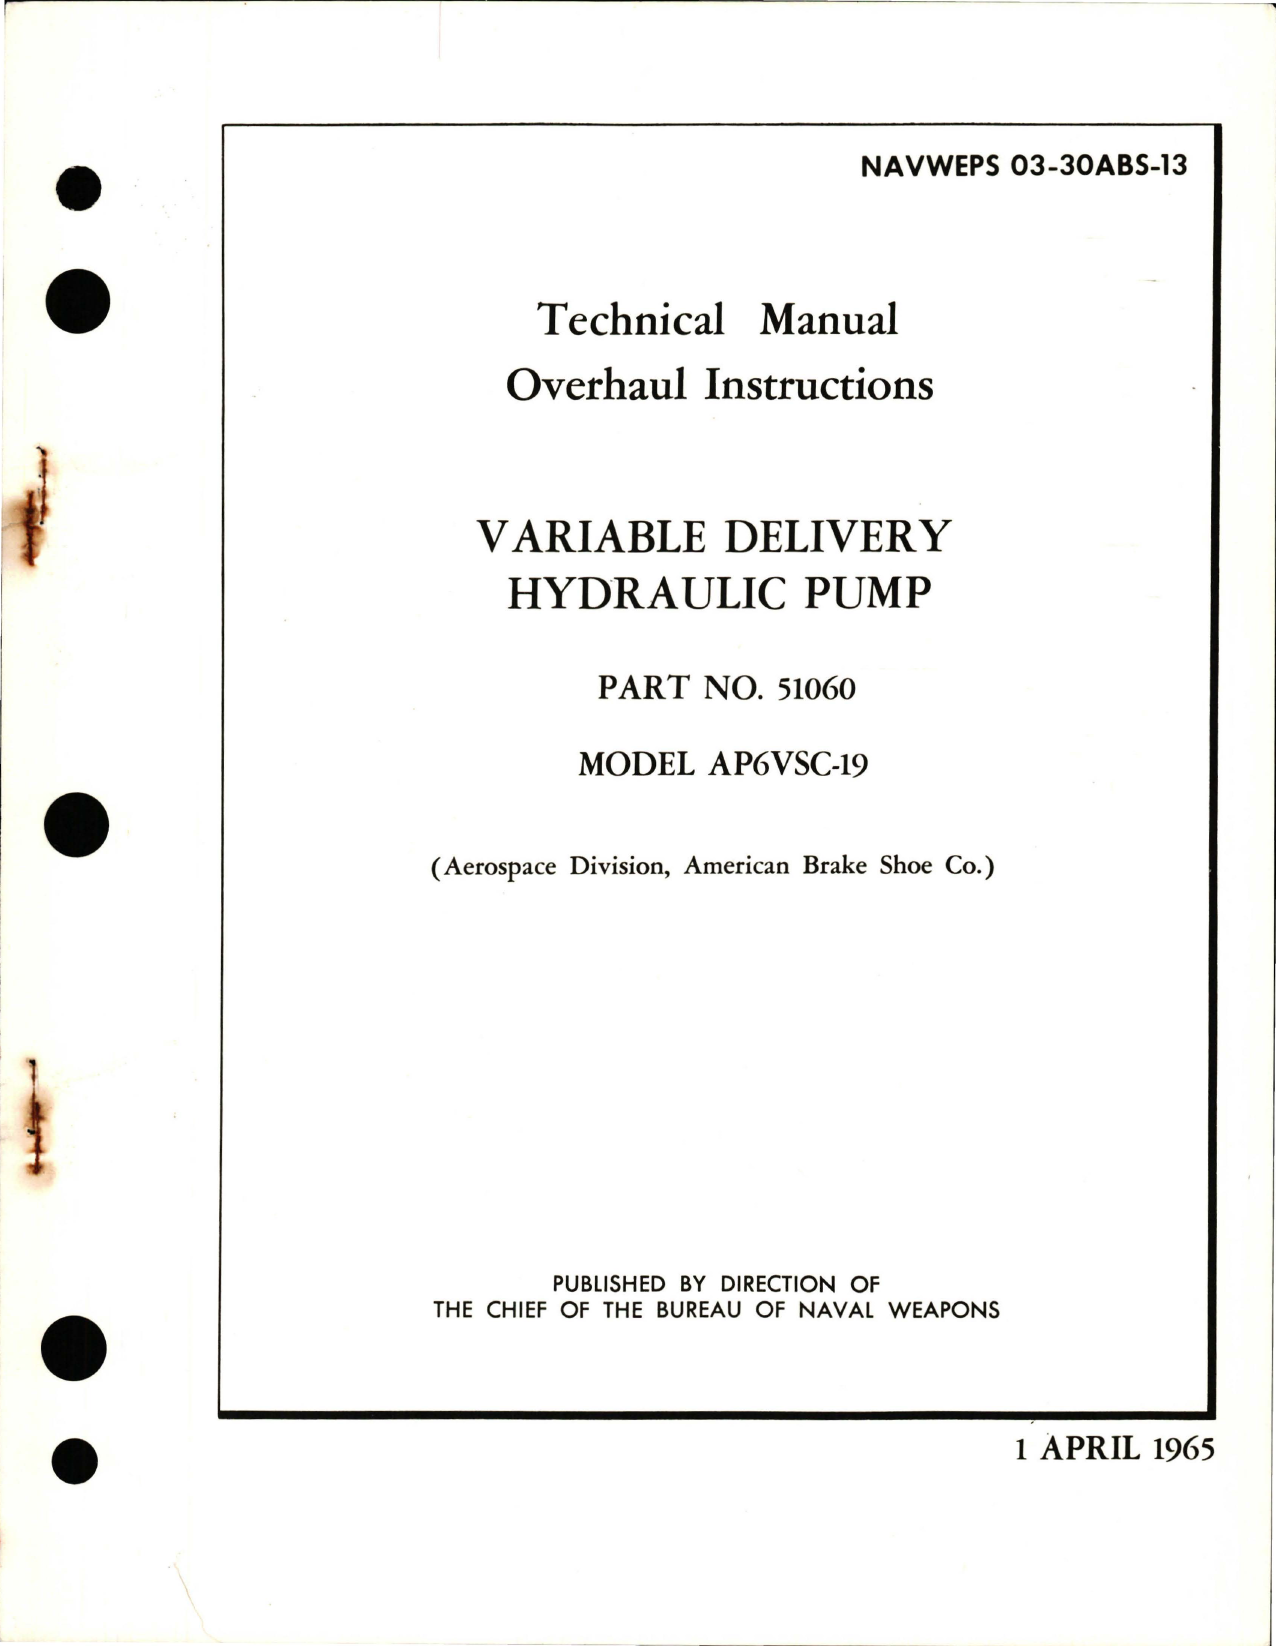 Sample page 1 from AirCorps Library document: Overhaul Instructions for Variable Delivery Hydraulic Pump - Part 51060 - Model AP6VSC-19